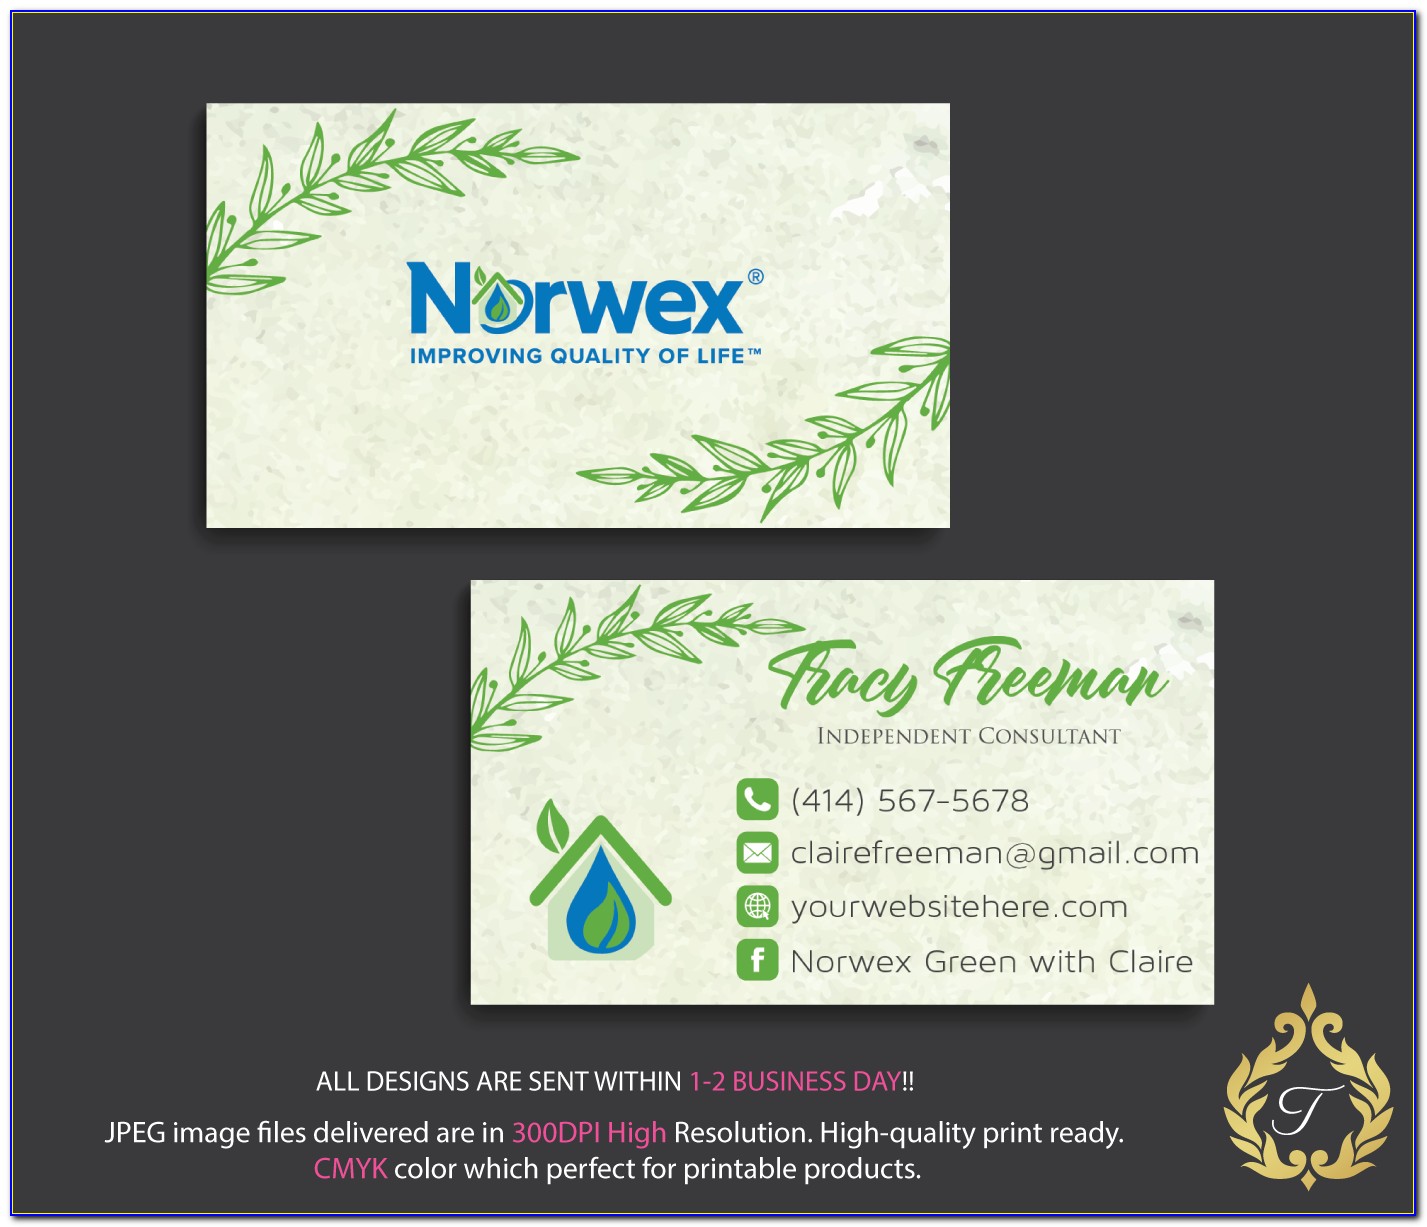 How To Order Norwex Business Cards